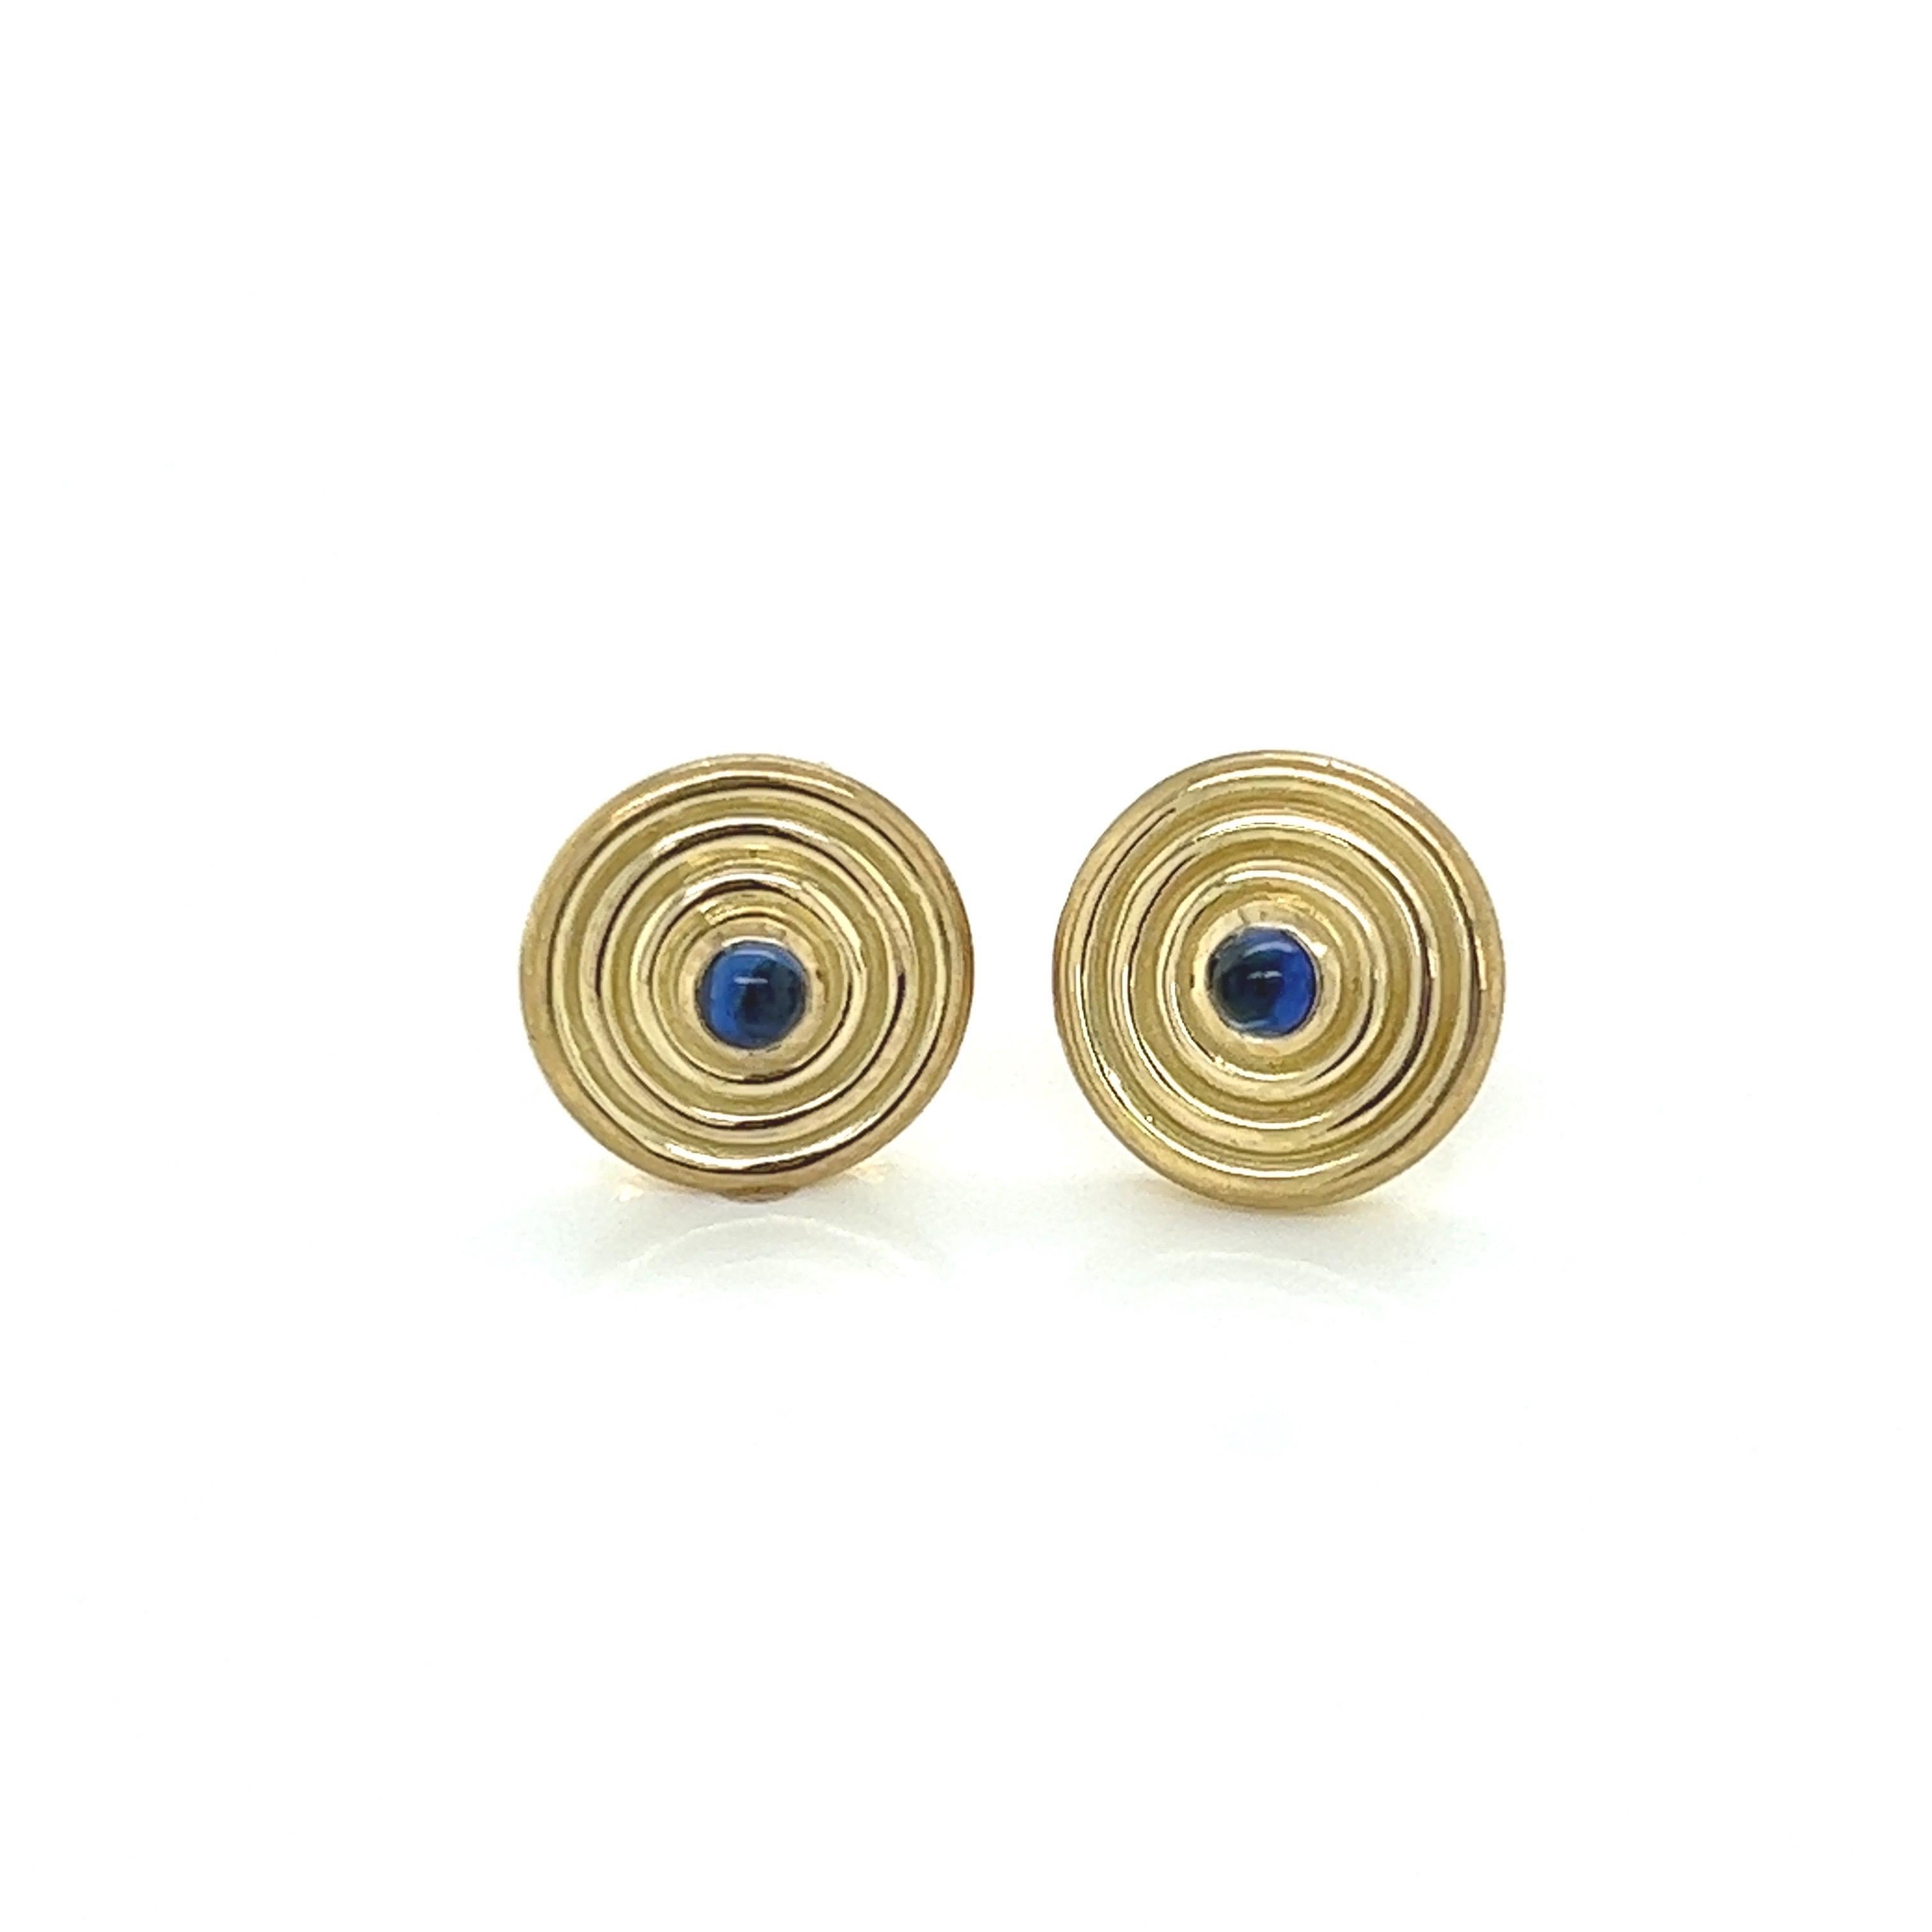 18k Yellow Gold Circular Multi Ring Stud Earrings with Cabochon Blue Sapphires In New Condition For Sale In New York, NY